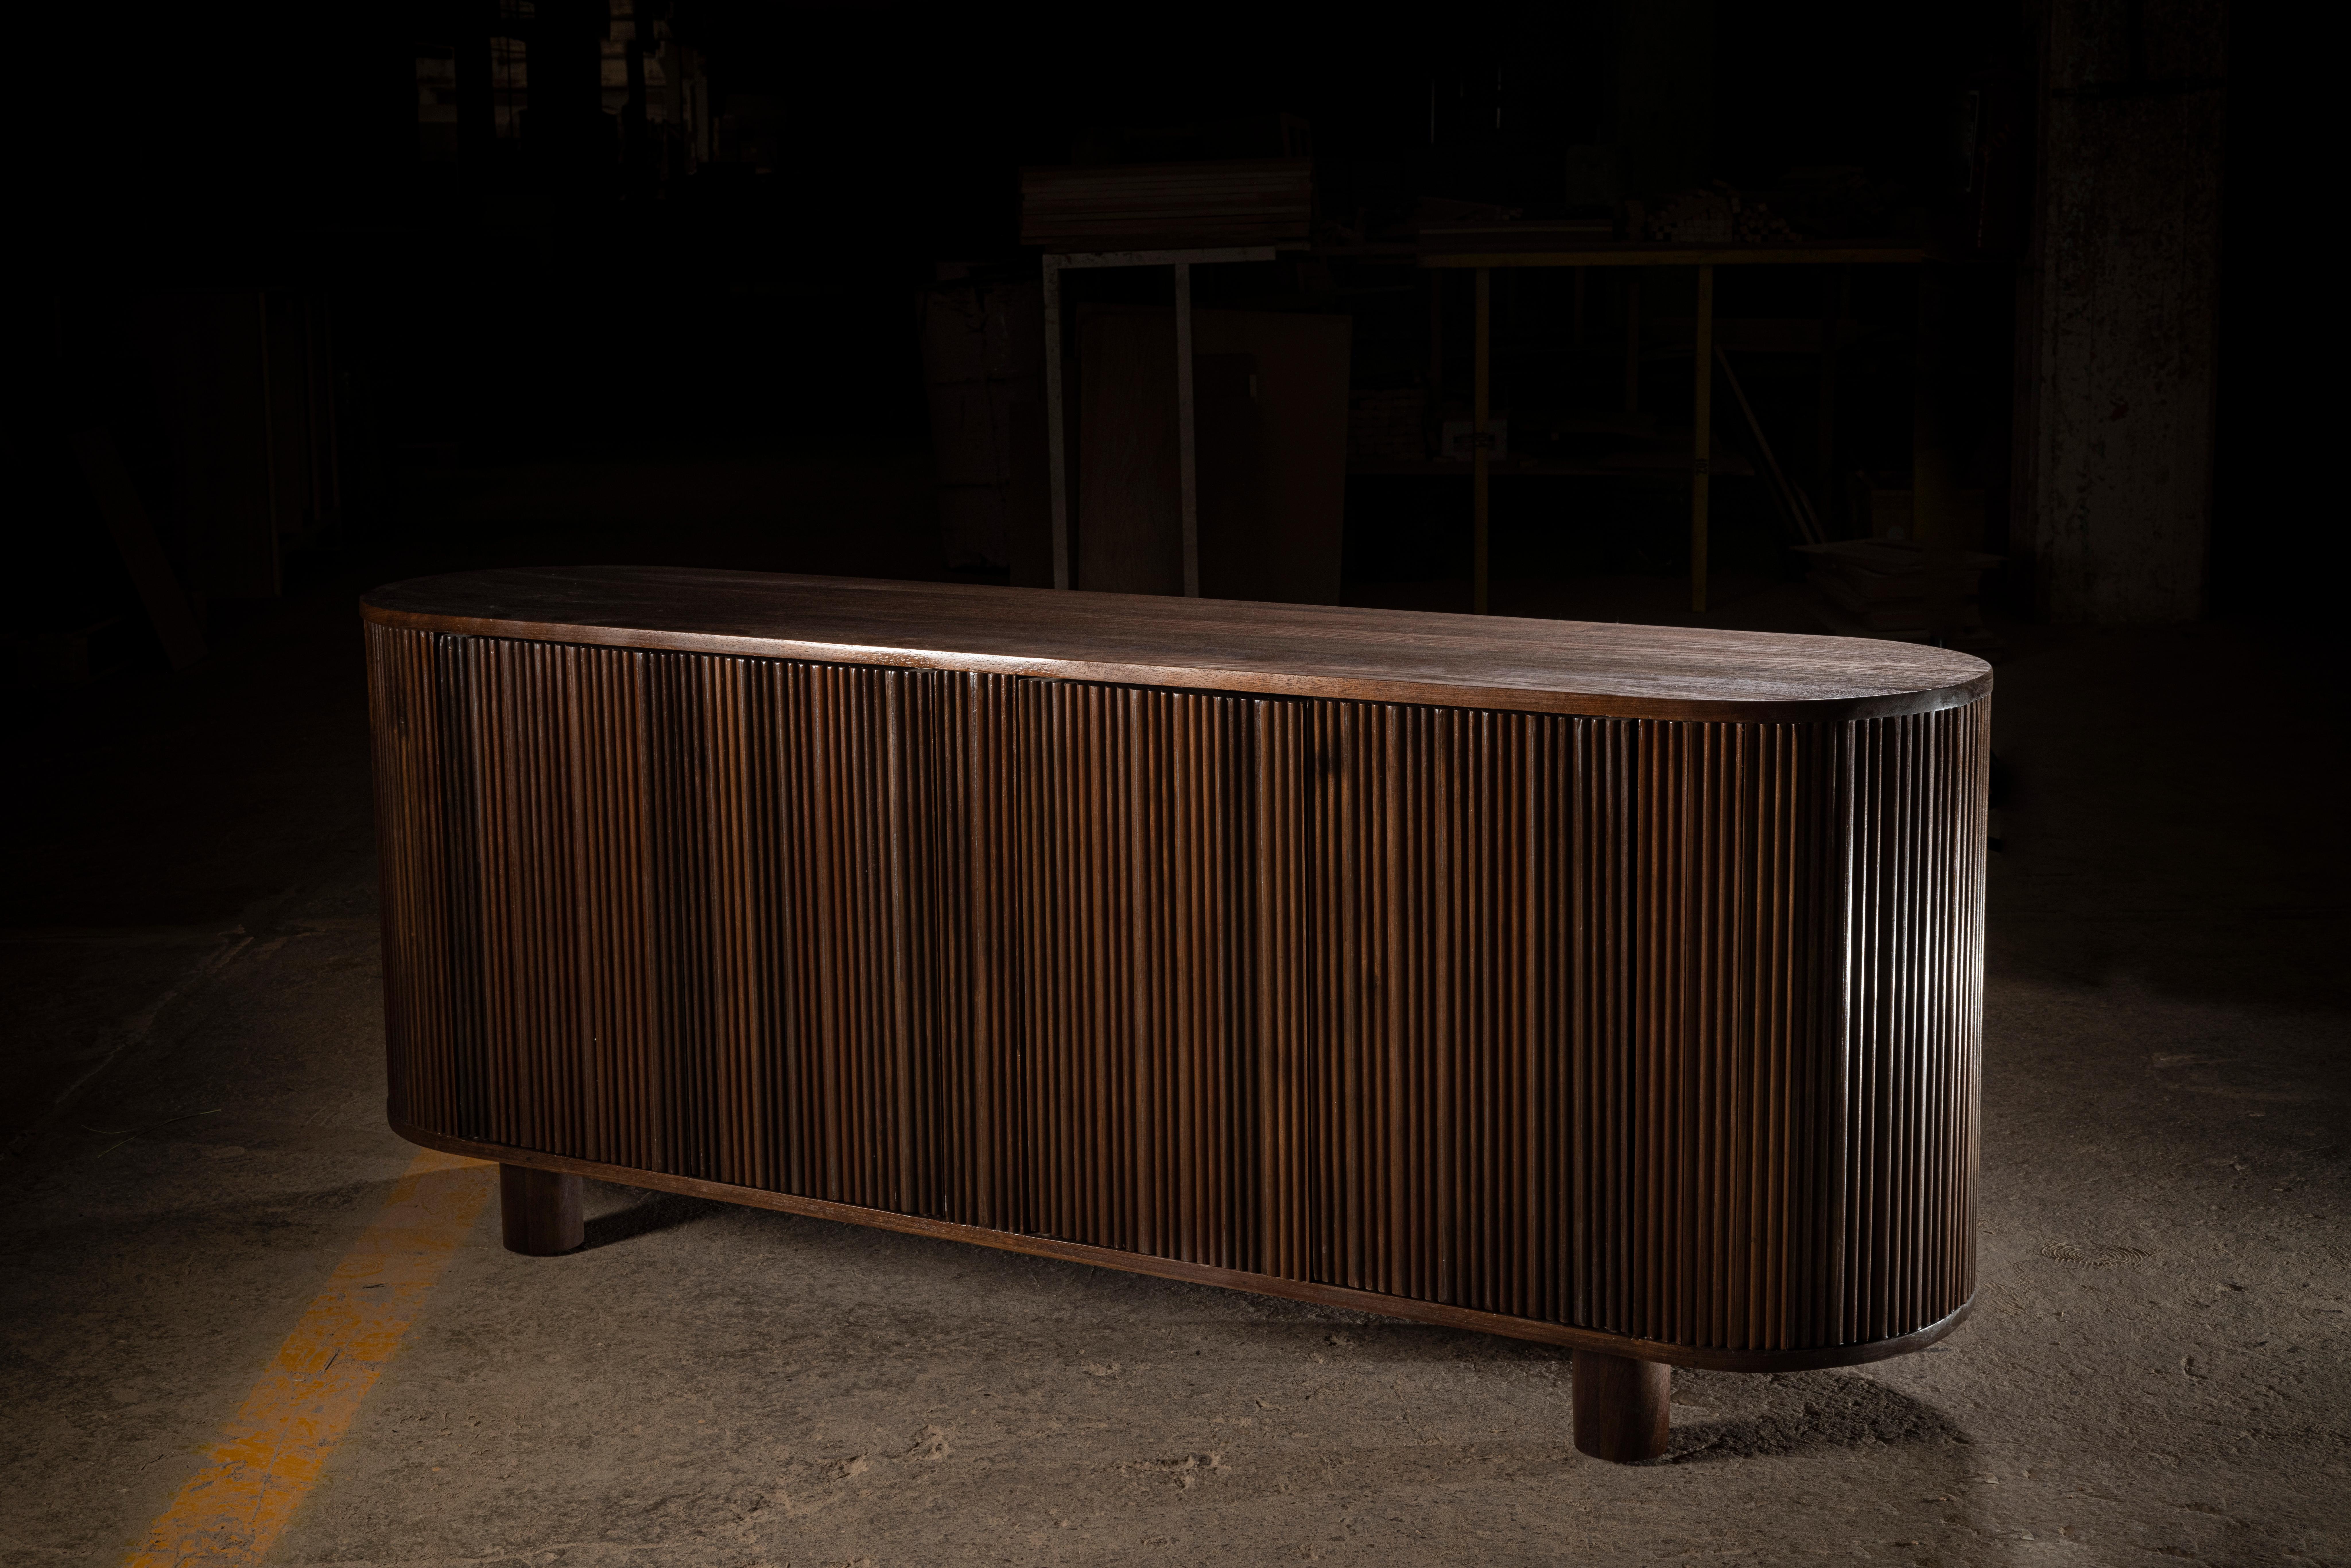 Oval shaped, hand-crafted solid Peruvian walnut sideboard.
It has 4 hidden doors and 2 shelves on the inside for storage.
